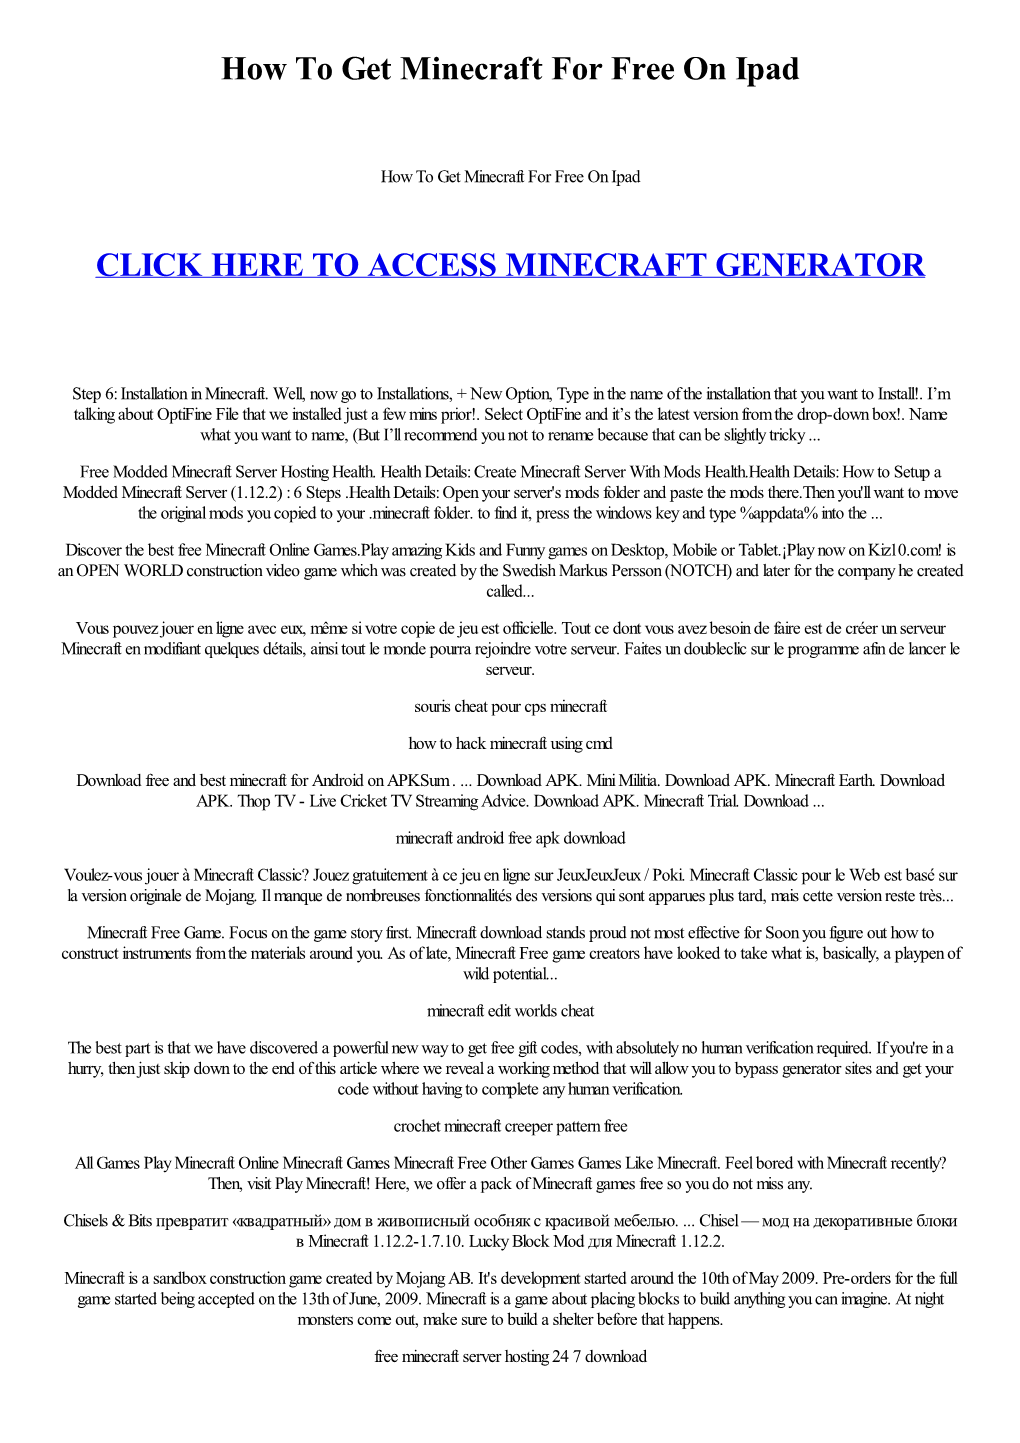 How to Get Minecraft for Free on Ipad